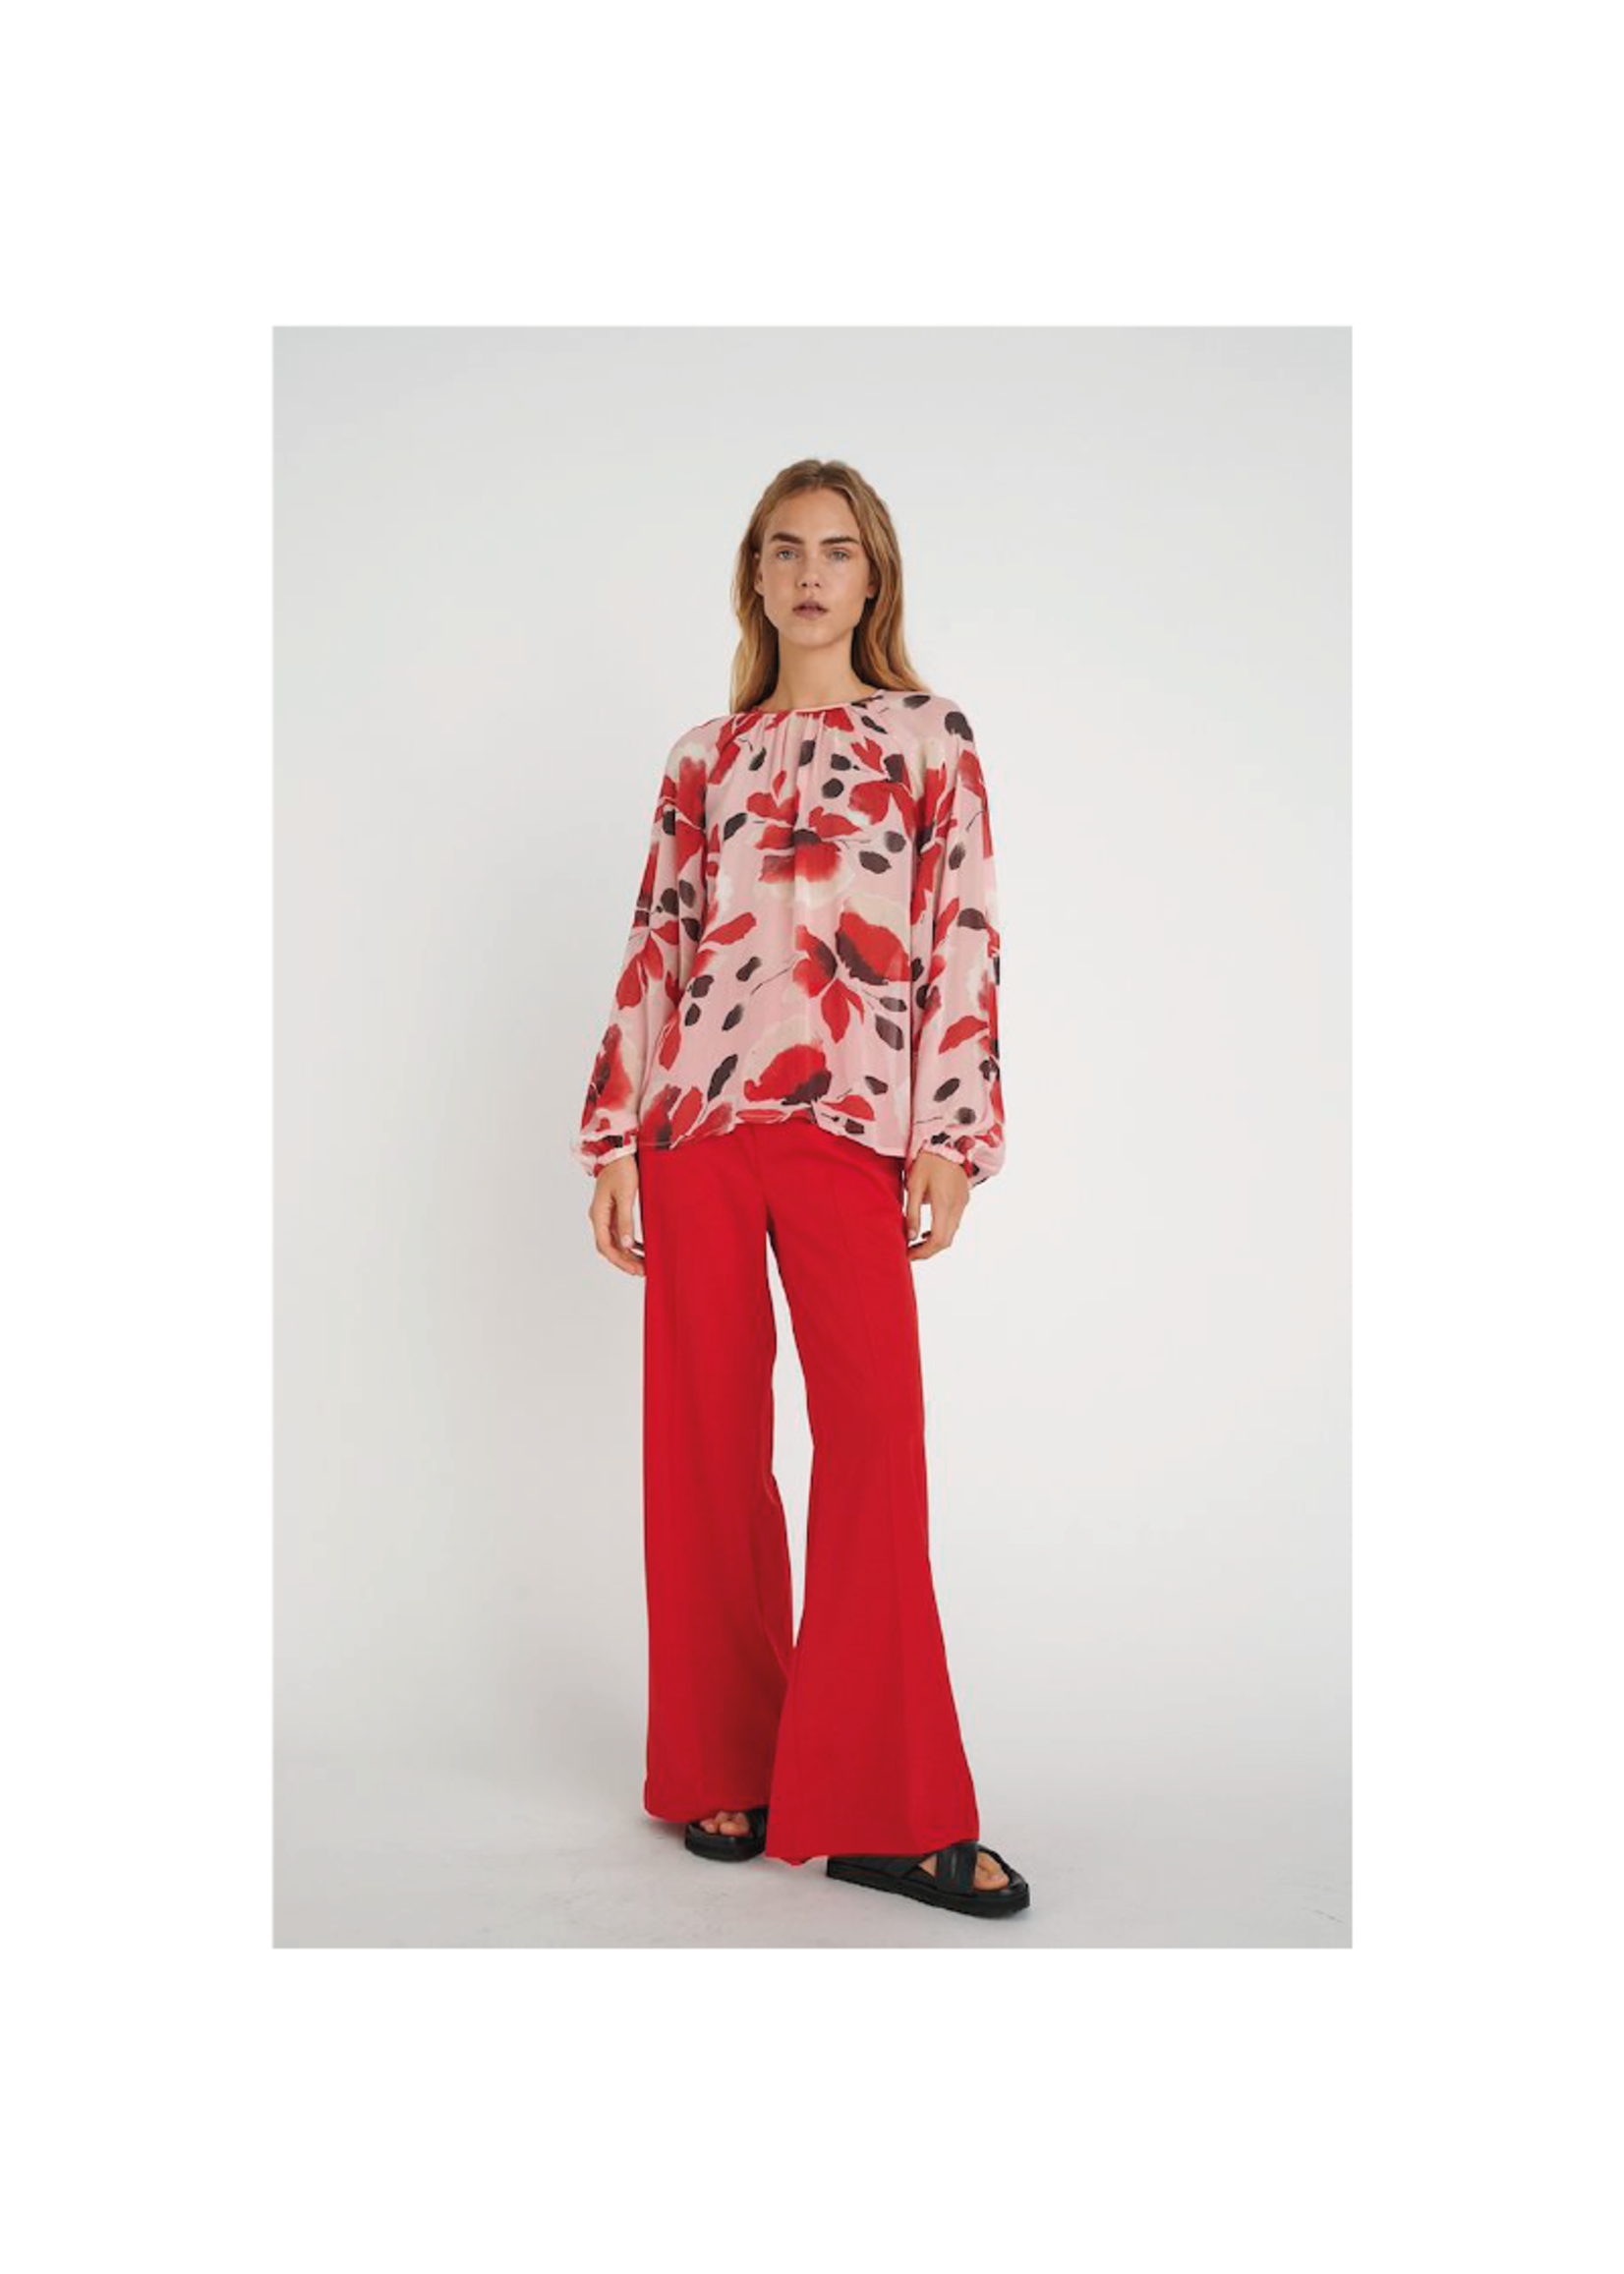 Inwear Maree Floral Blouse